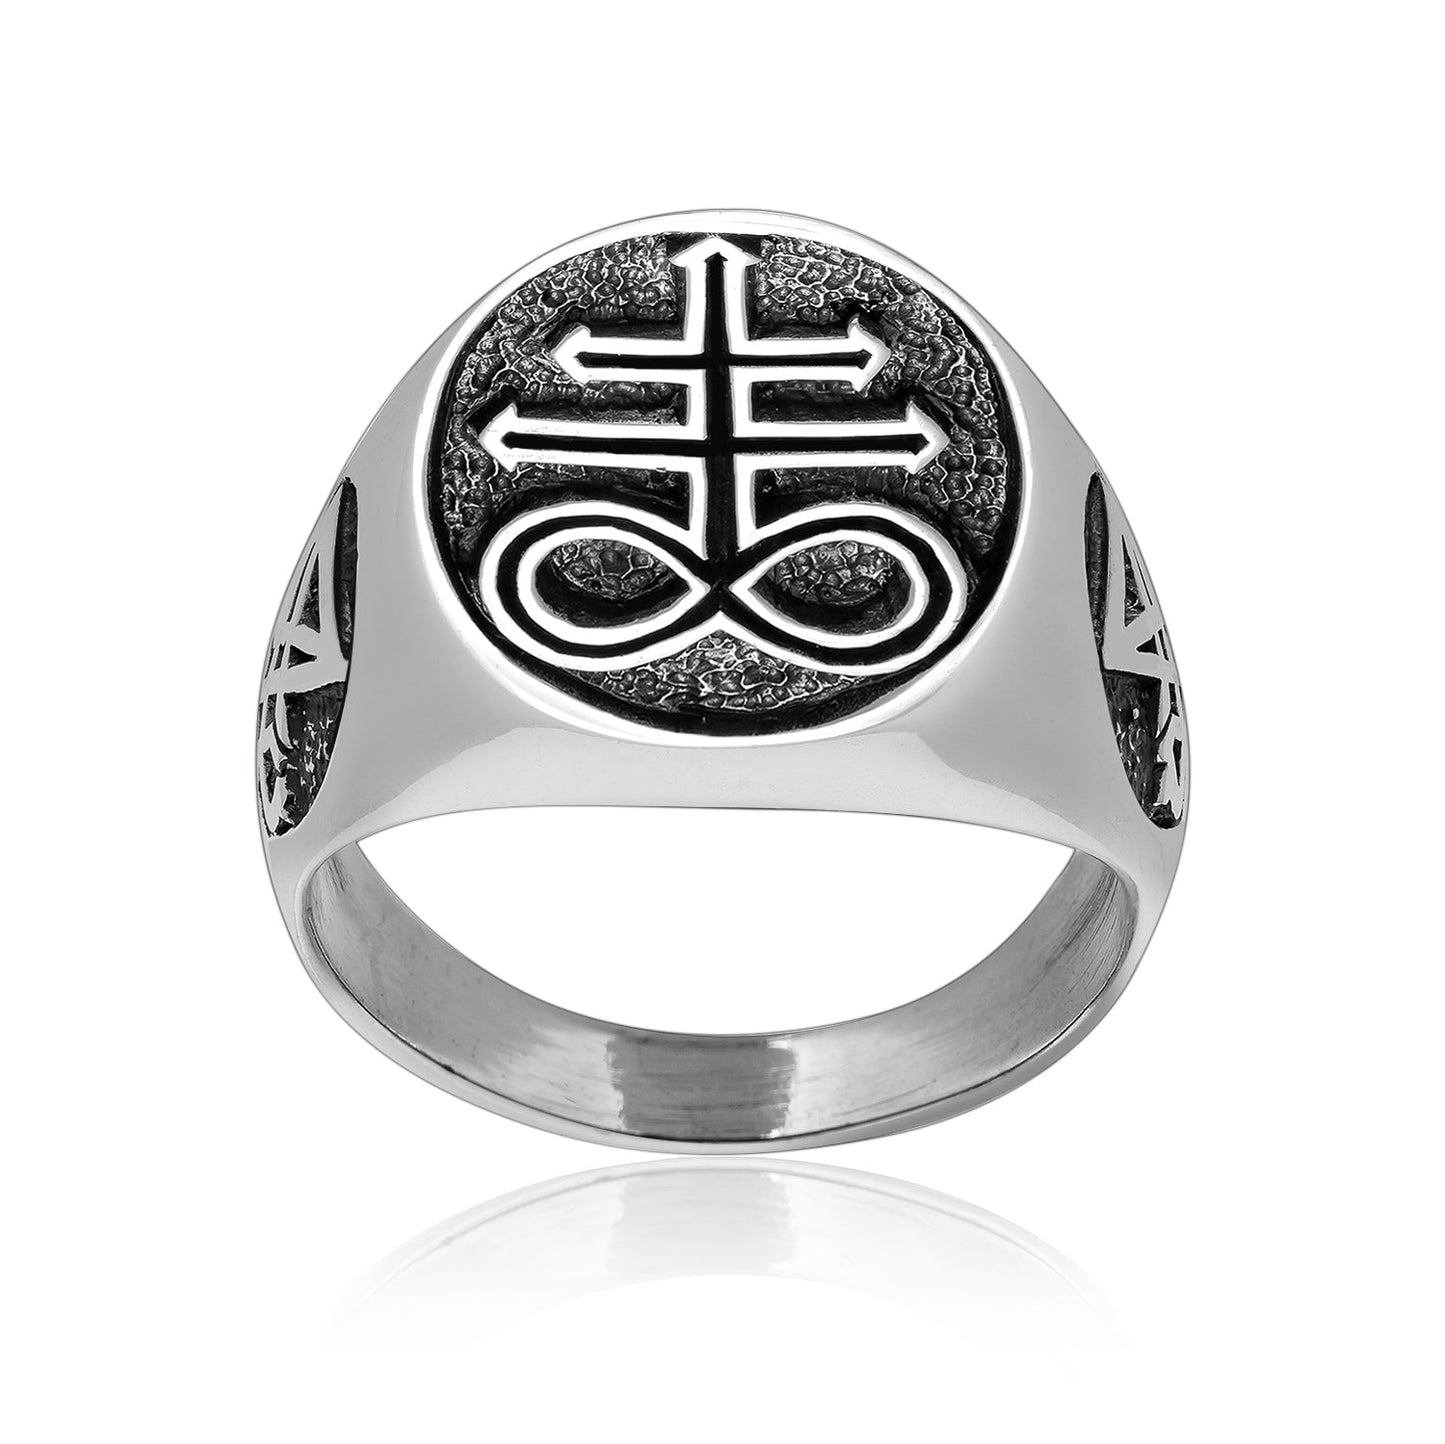 Sterling Silver Ring with Leviathan Cross and Sigil of Lucifer - SilverMania925